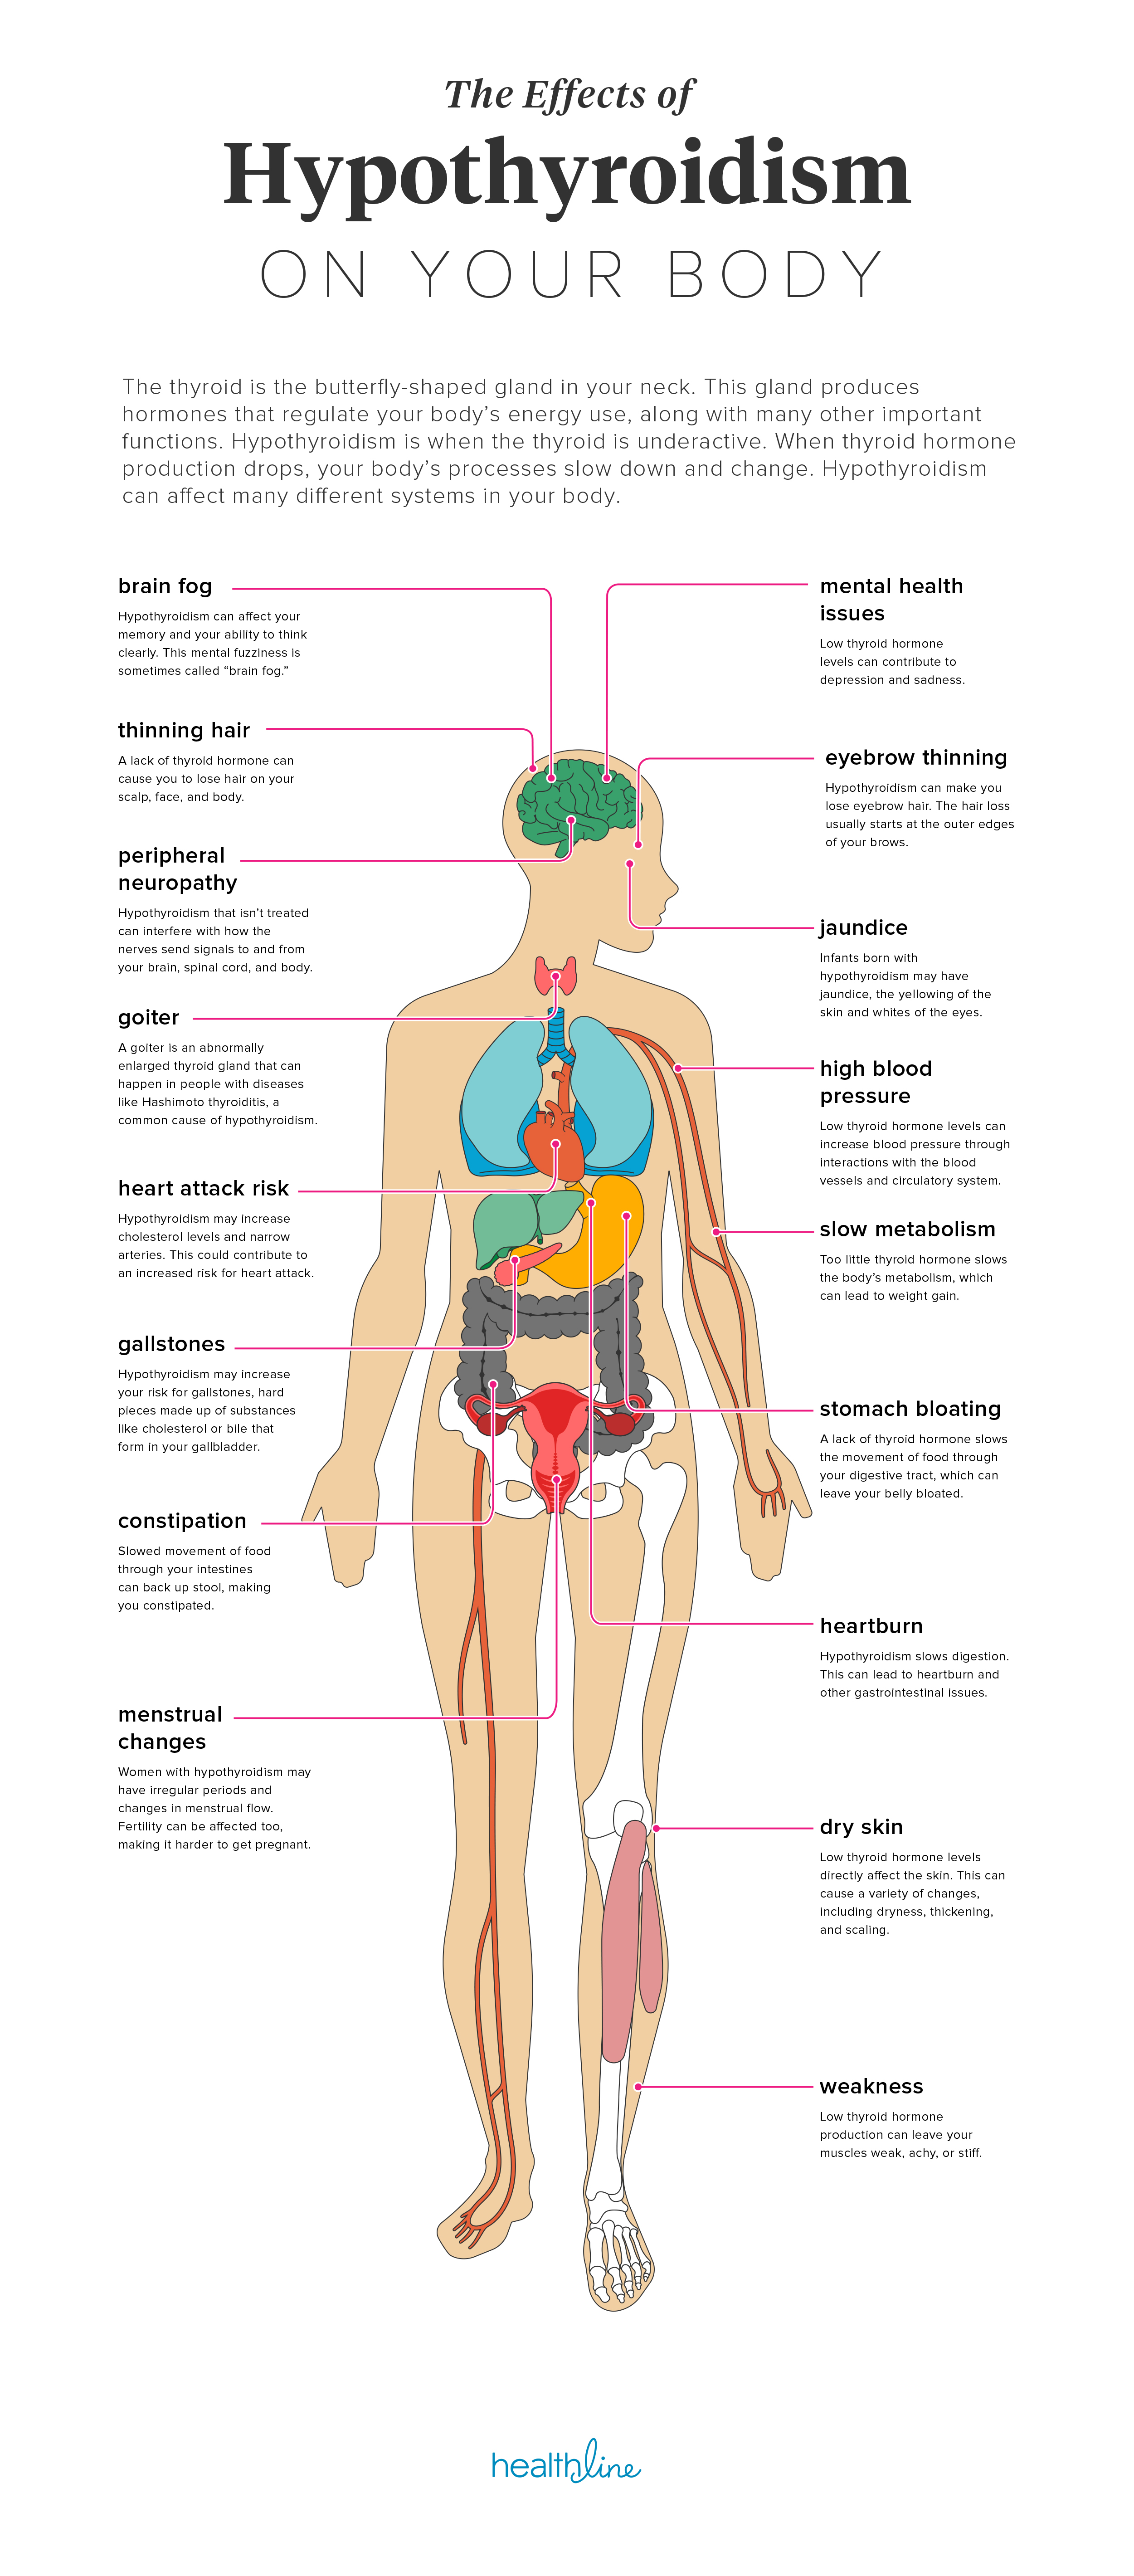 The Effects of Hypothyroidism on the Body